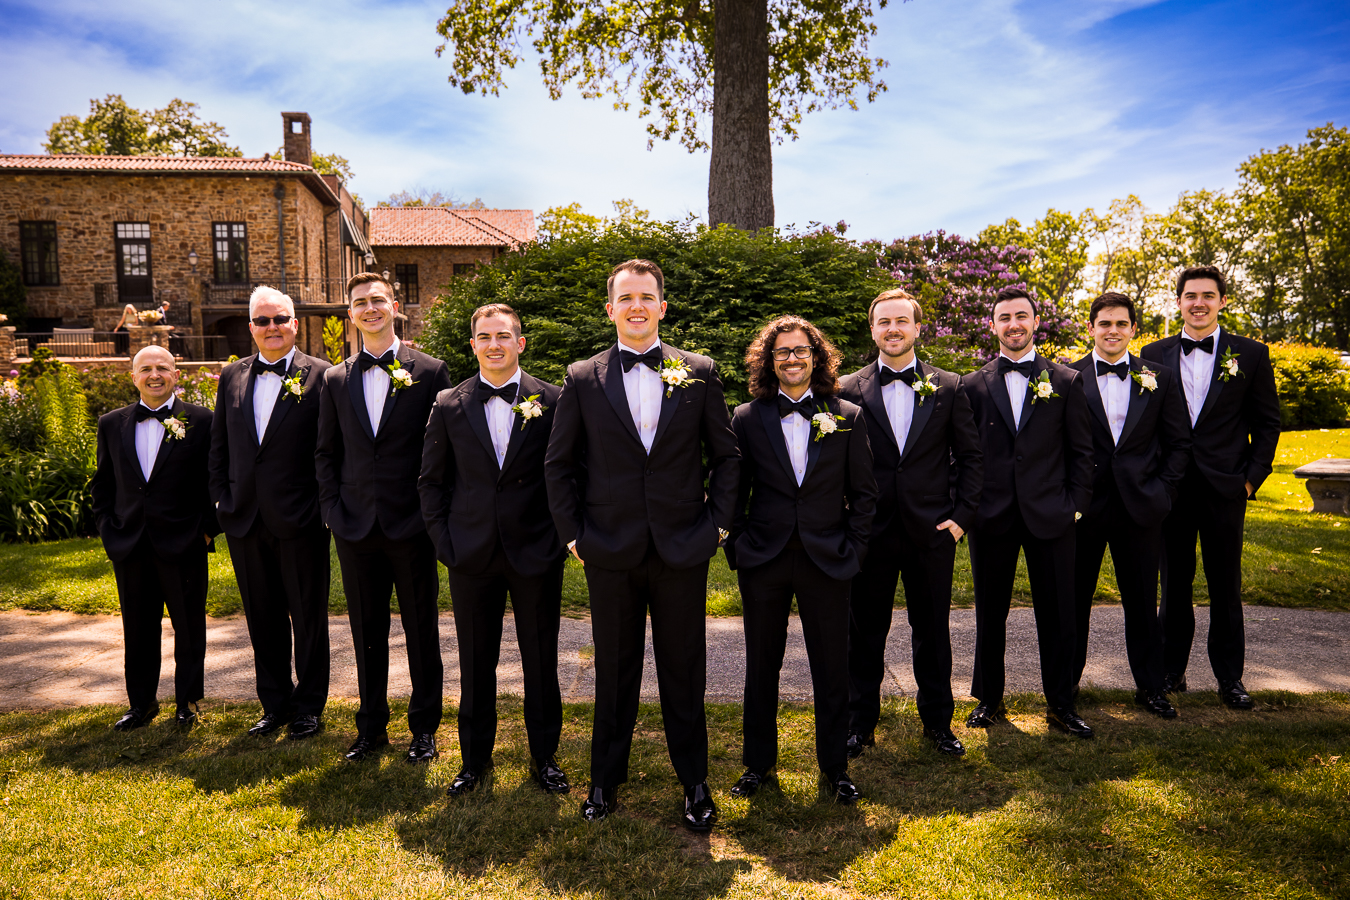 pa wedding photographer, rhinehart photography, captures this traditional portrait of the groom and his groomsmen outside of the country club before the ceremony 